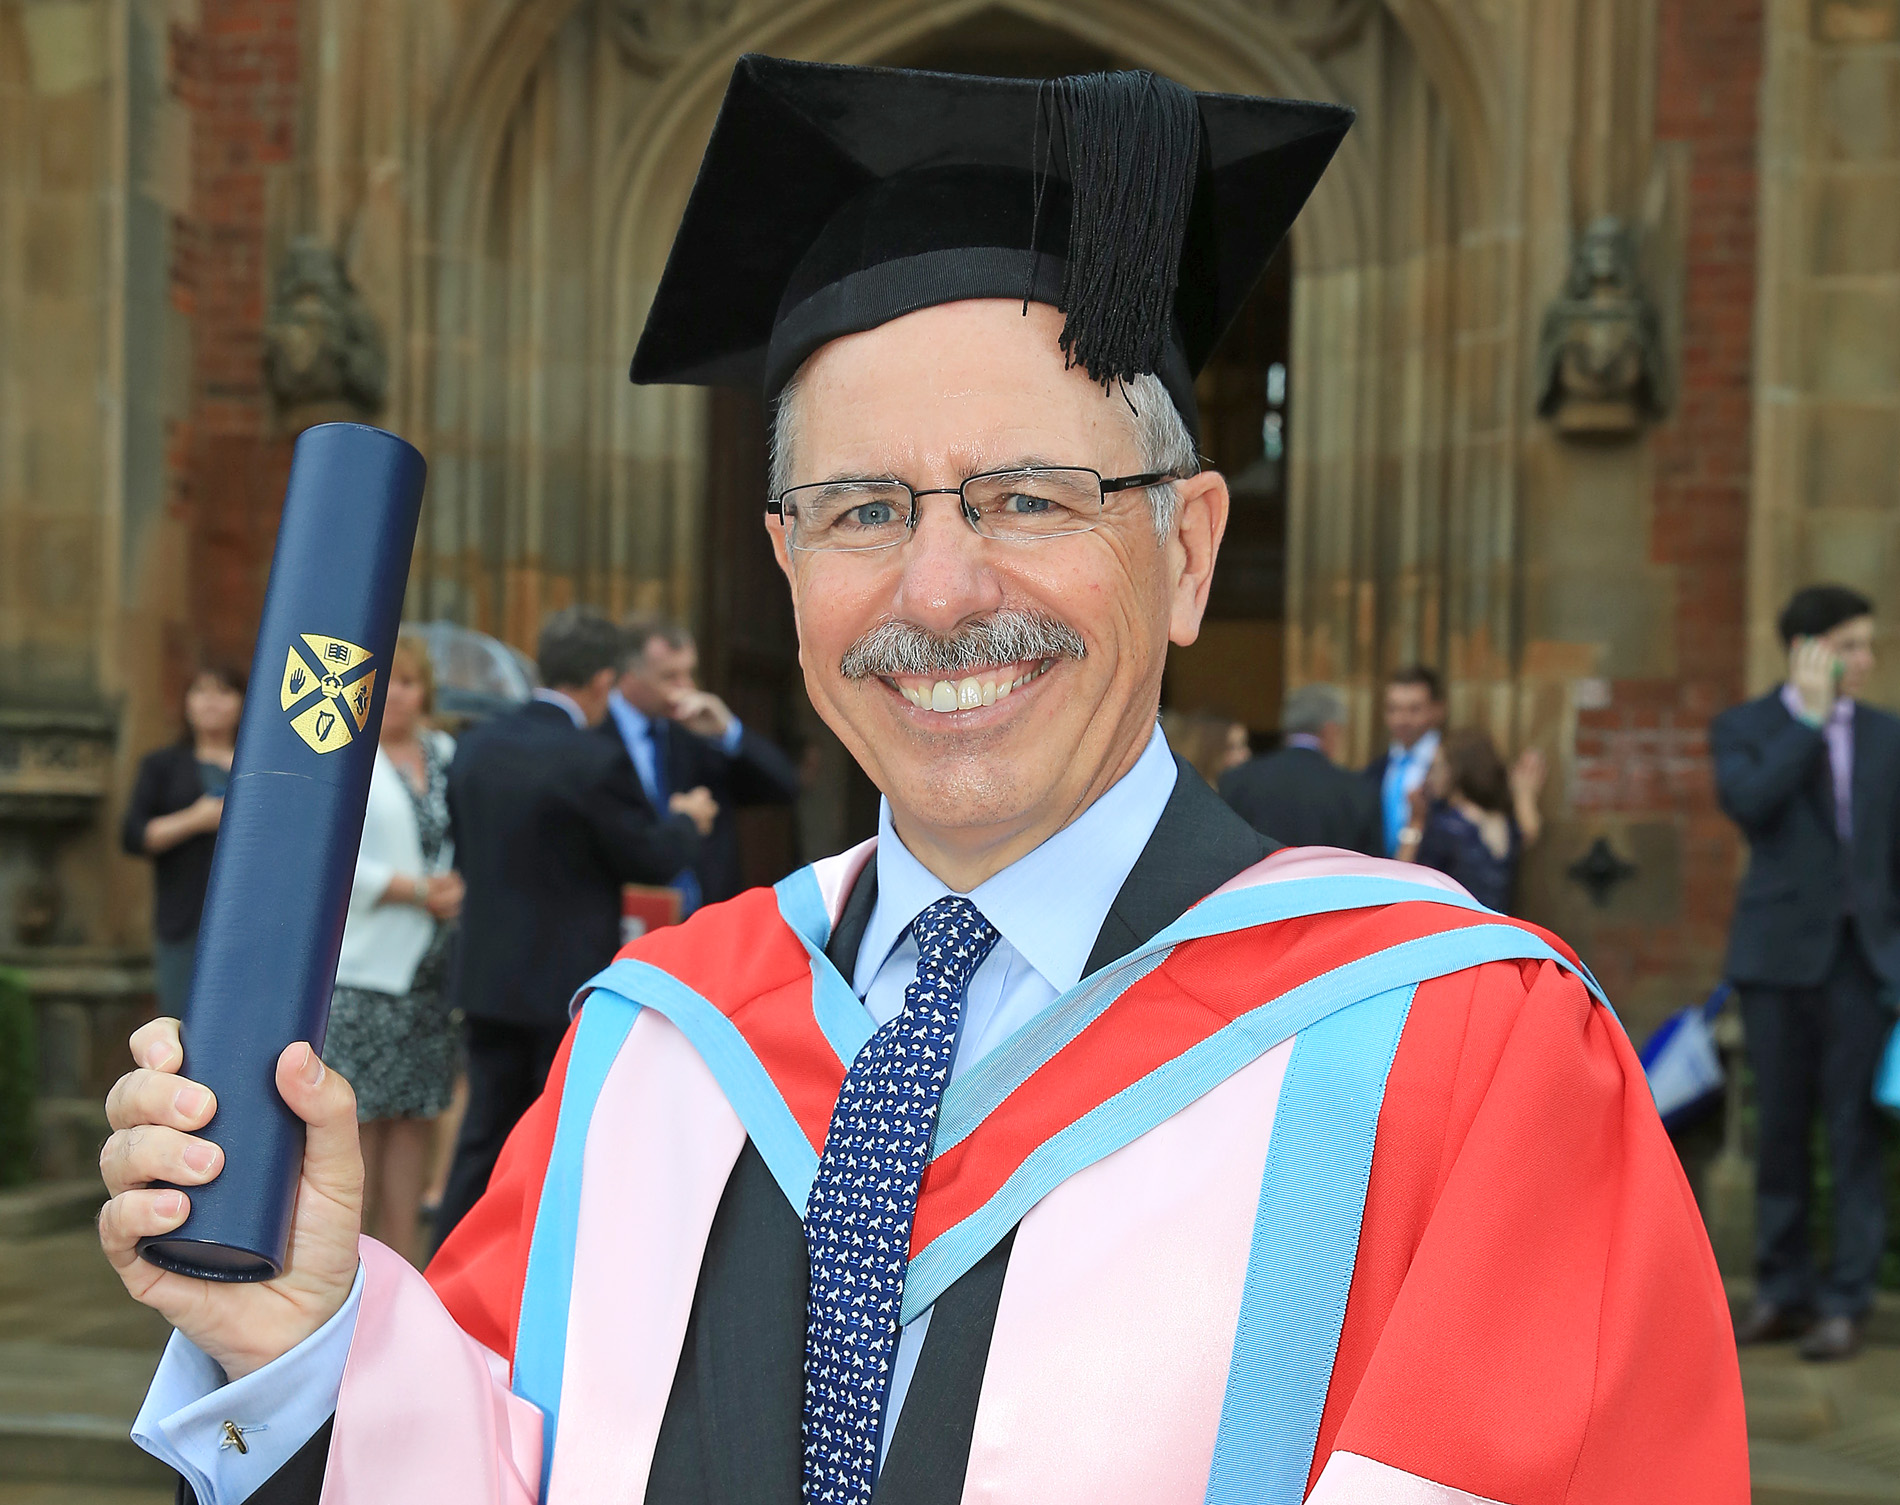 Shaun Kelly shows his delight after receiving his honorary doctorate from Queen’s yesterday